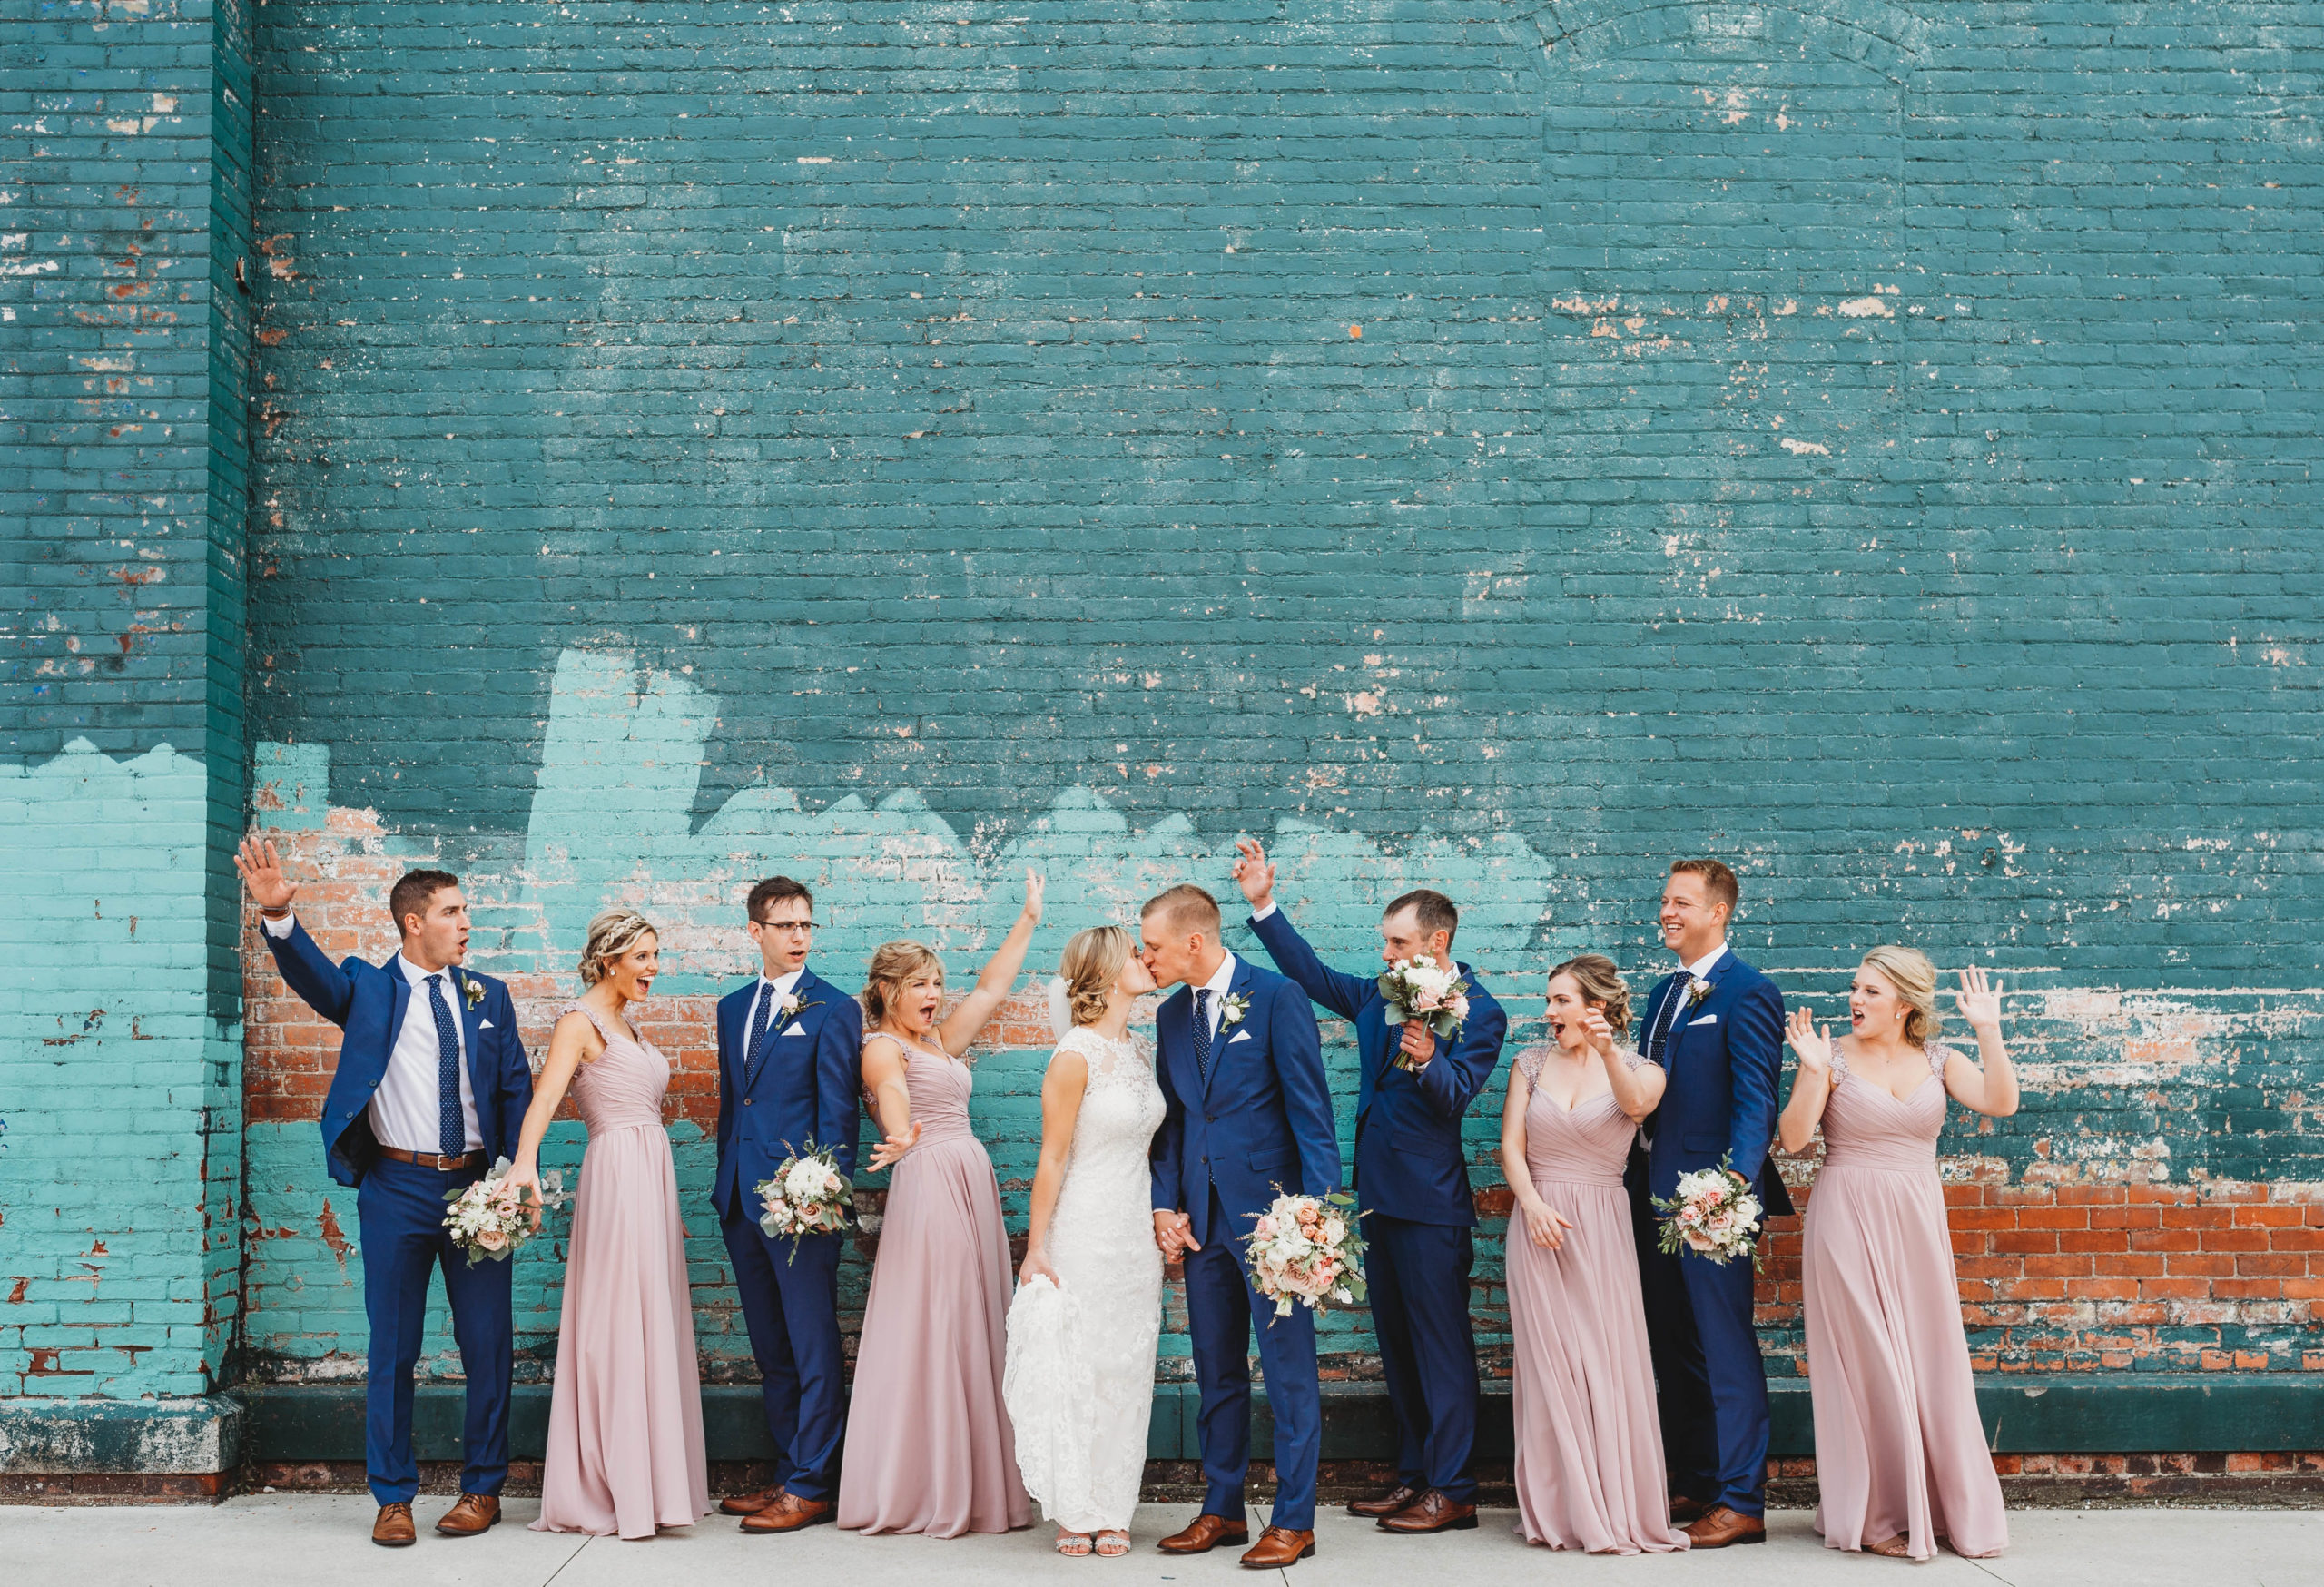 How to choose your wedding photographer: tips from Ohio wedding photographer